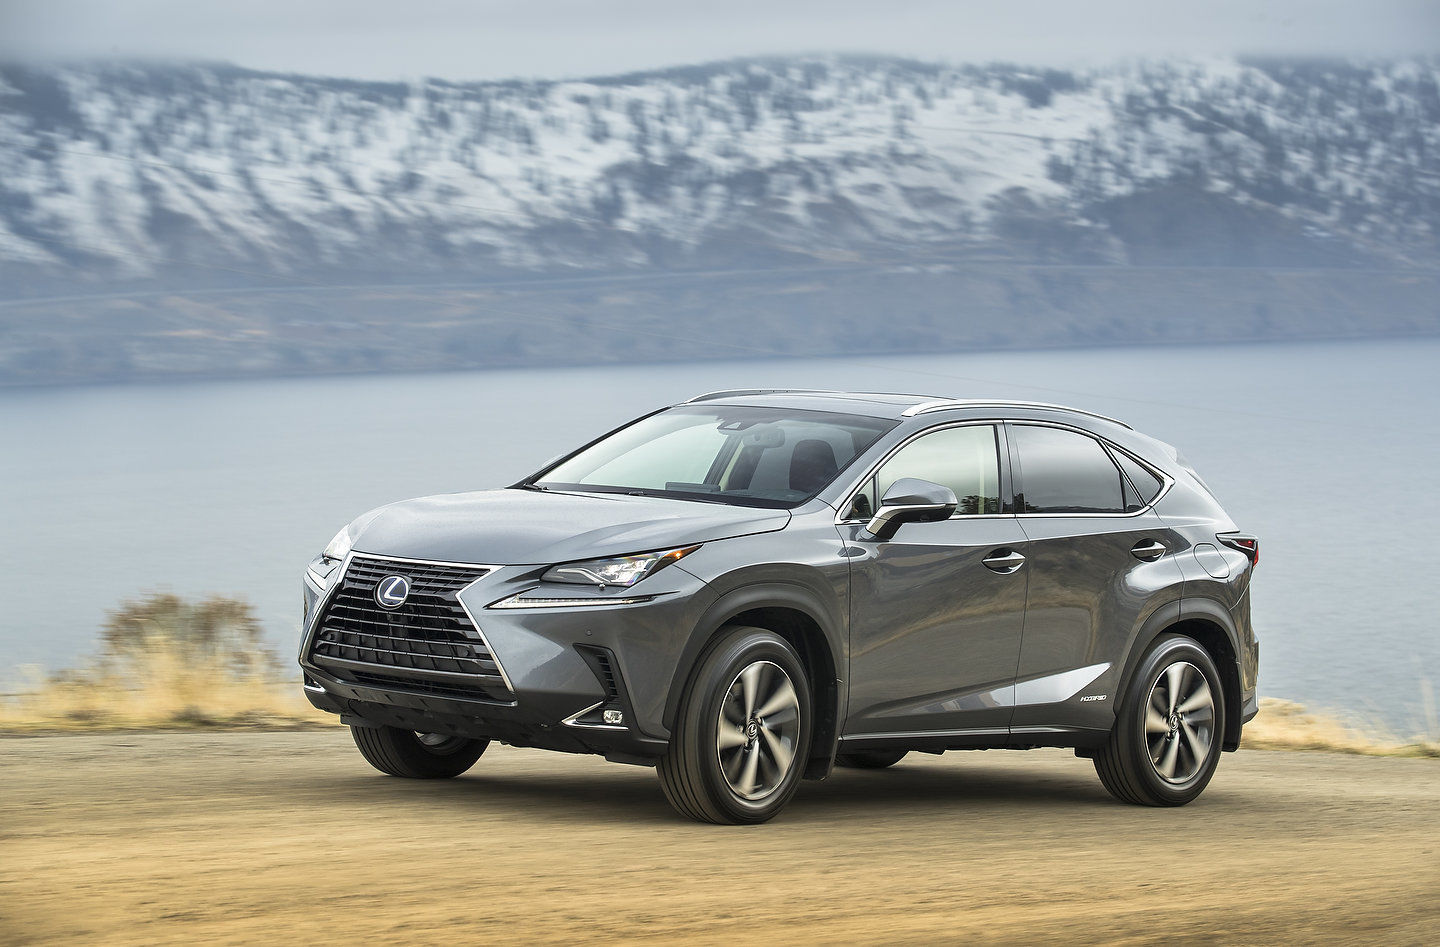 Lexus Will Produce the NX Luxury SUV in Canada as Early as 2022